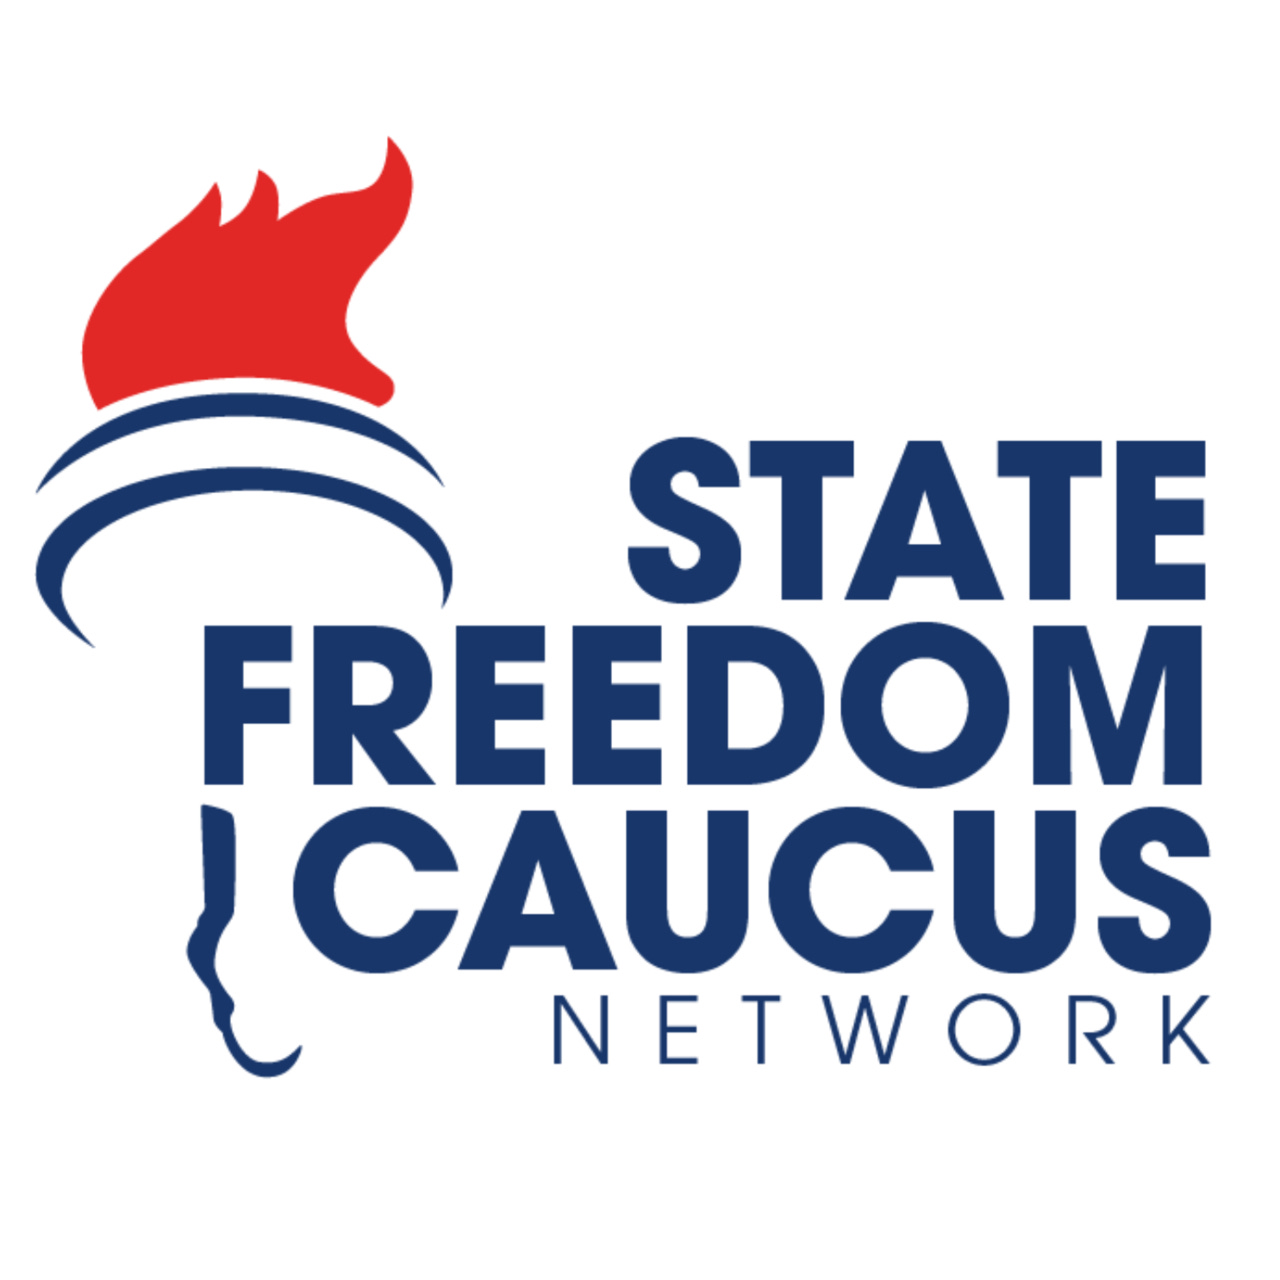 State Freedom Caucus Network | Under the Dome